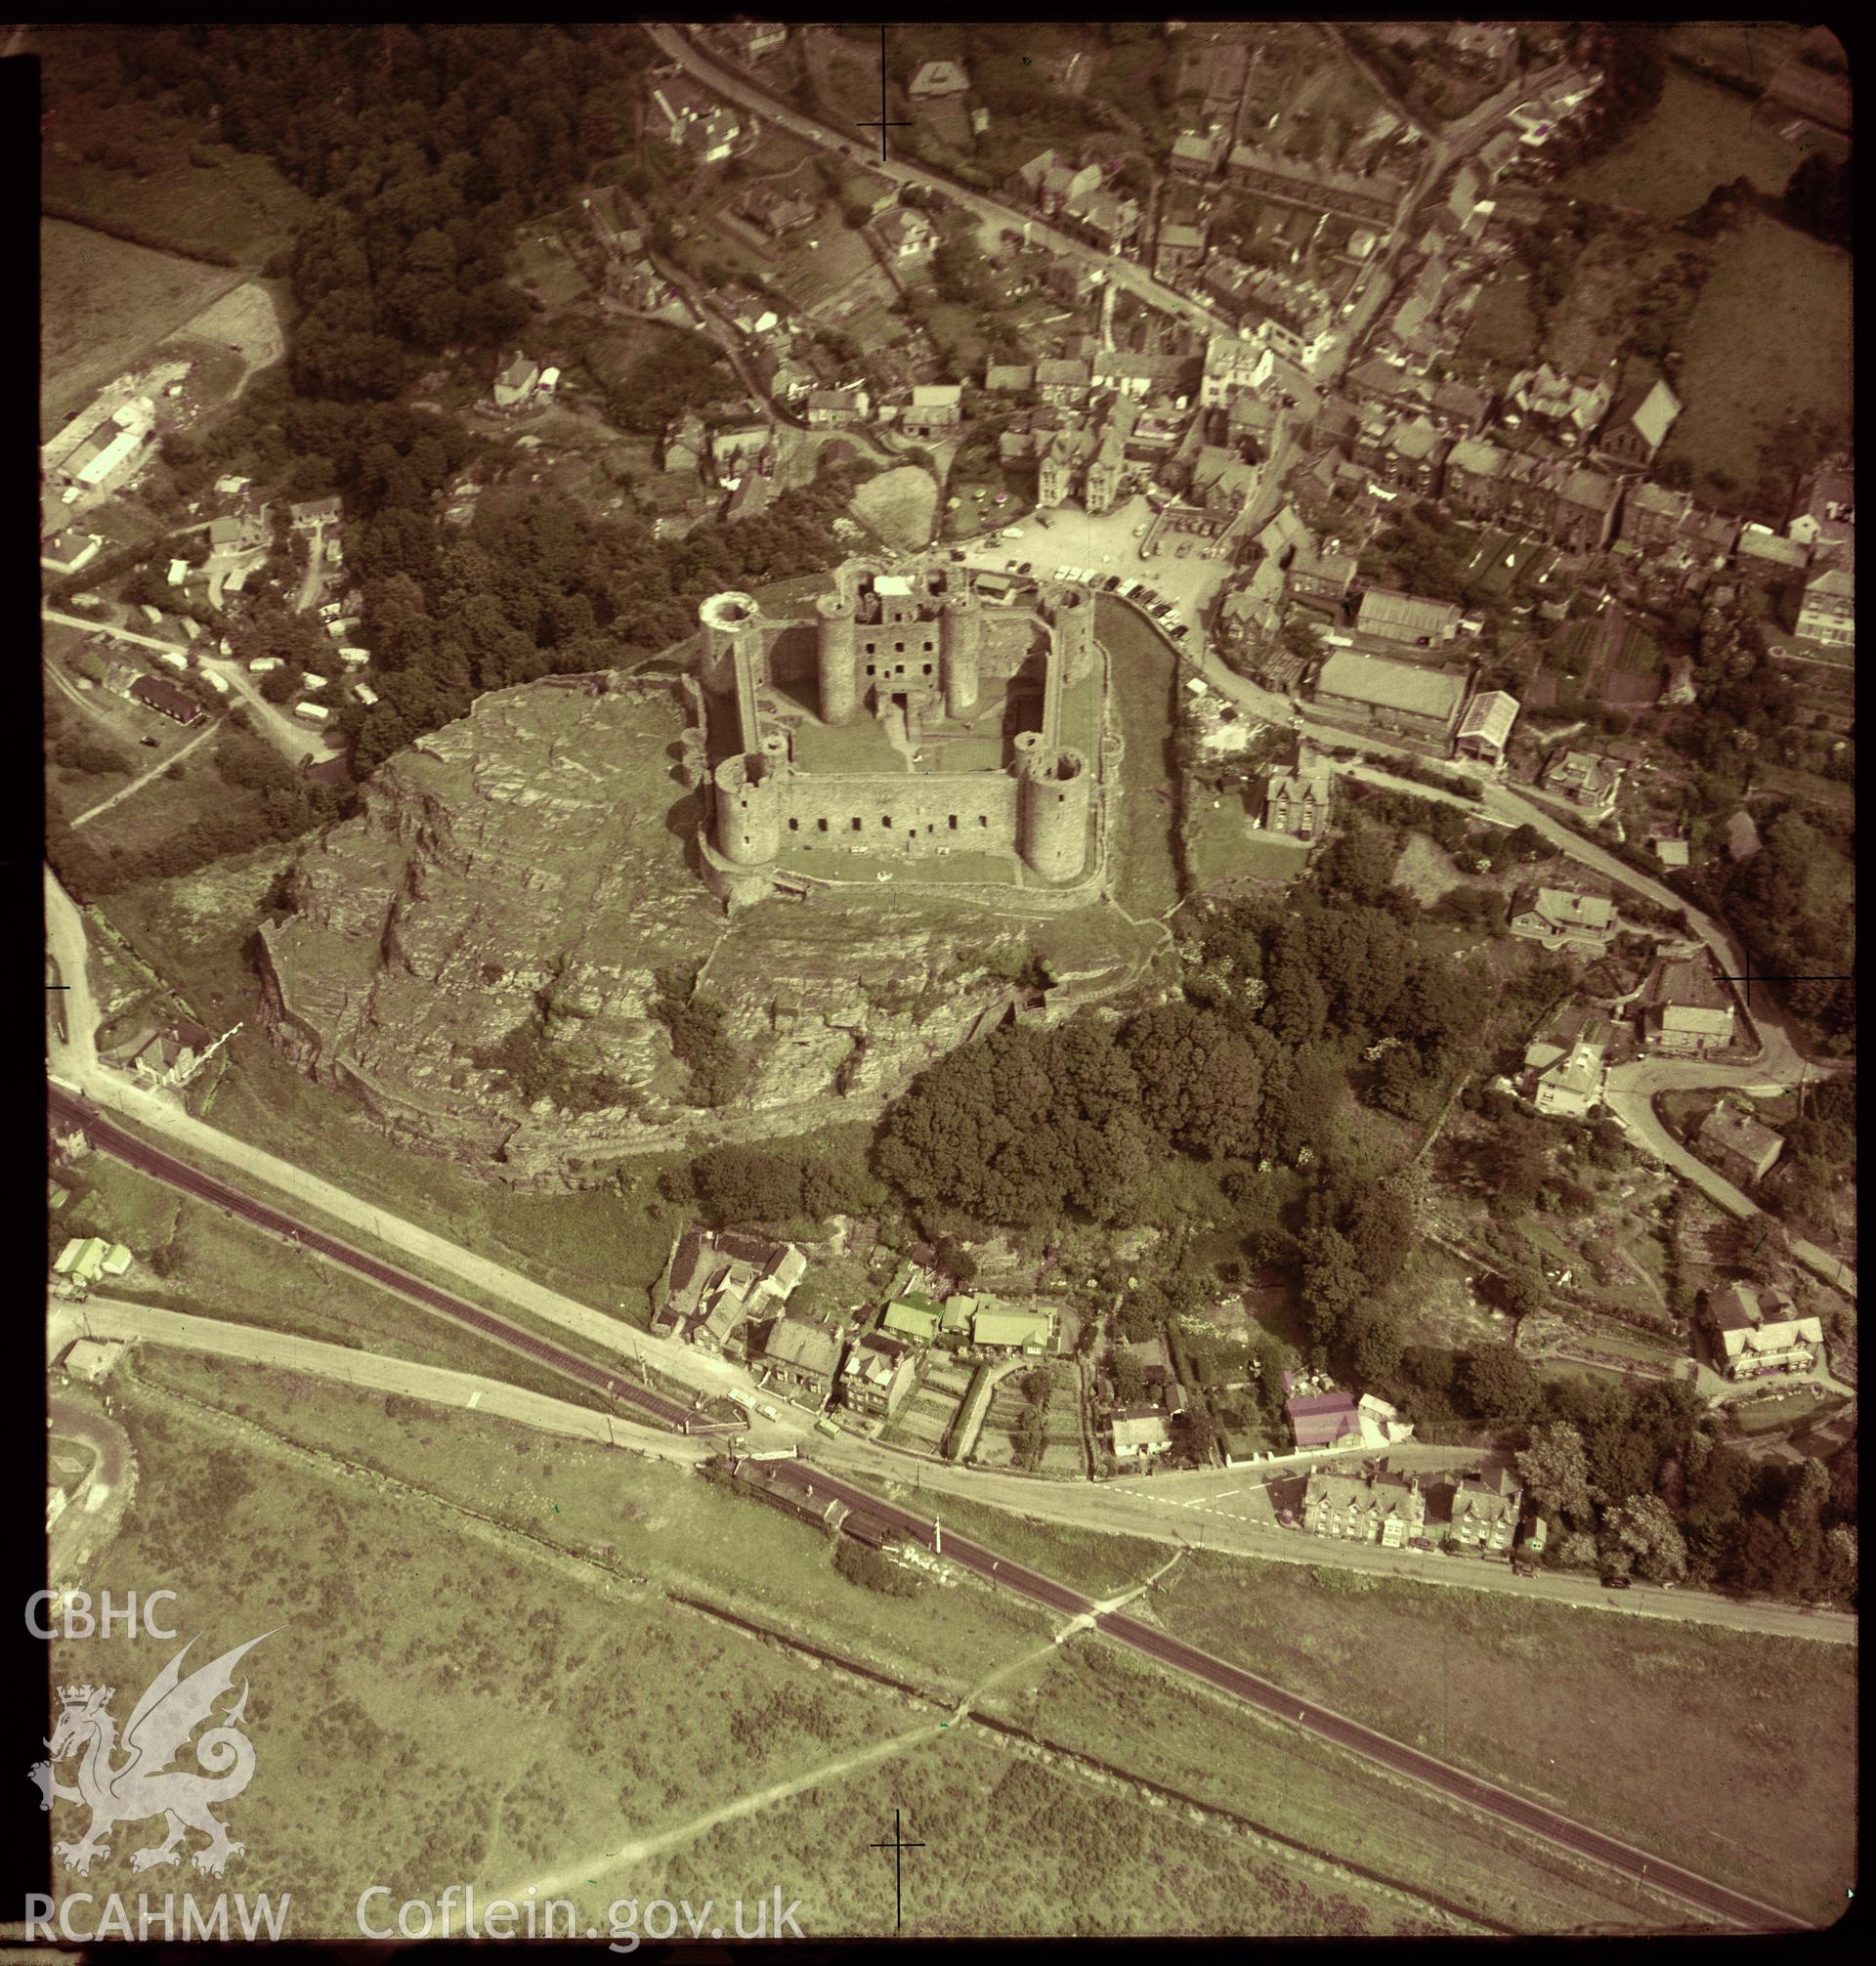 Digital copy of a colour negative showing view of Harlech Castle dated 1962.